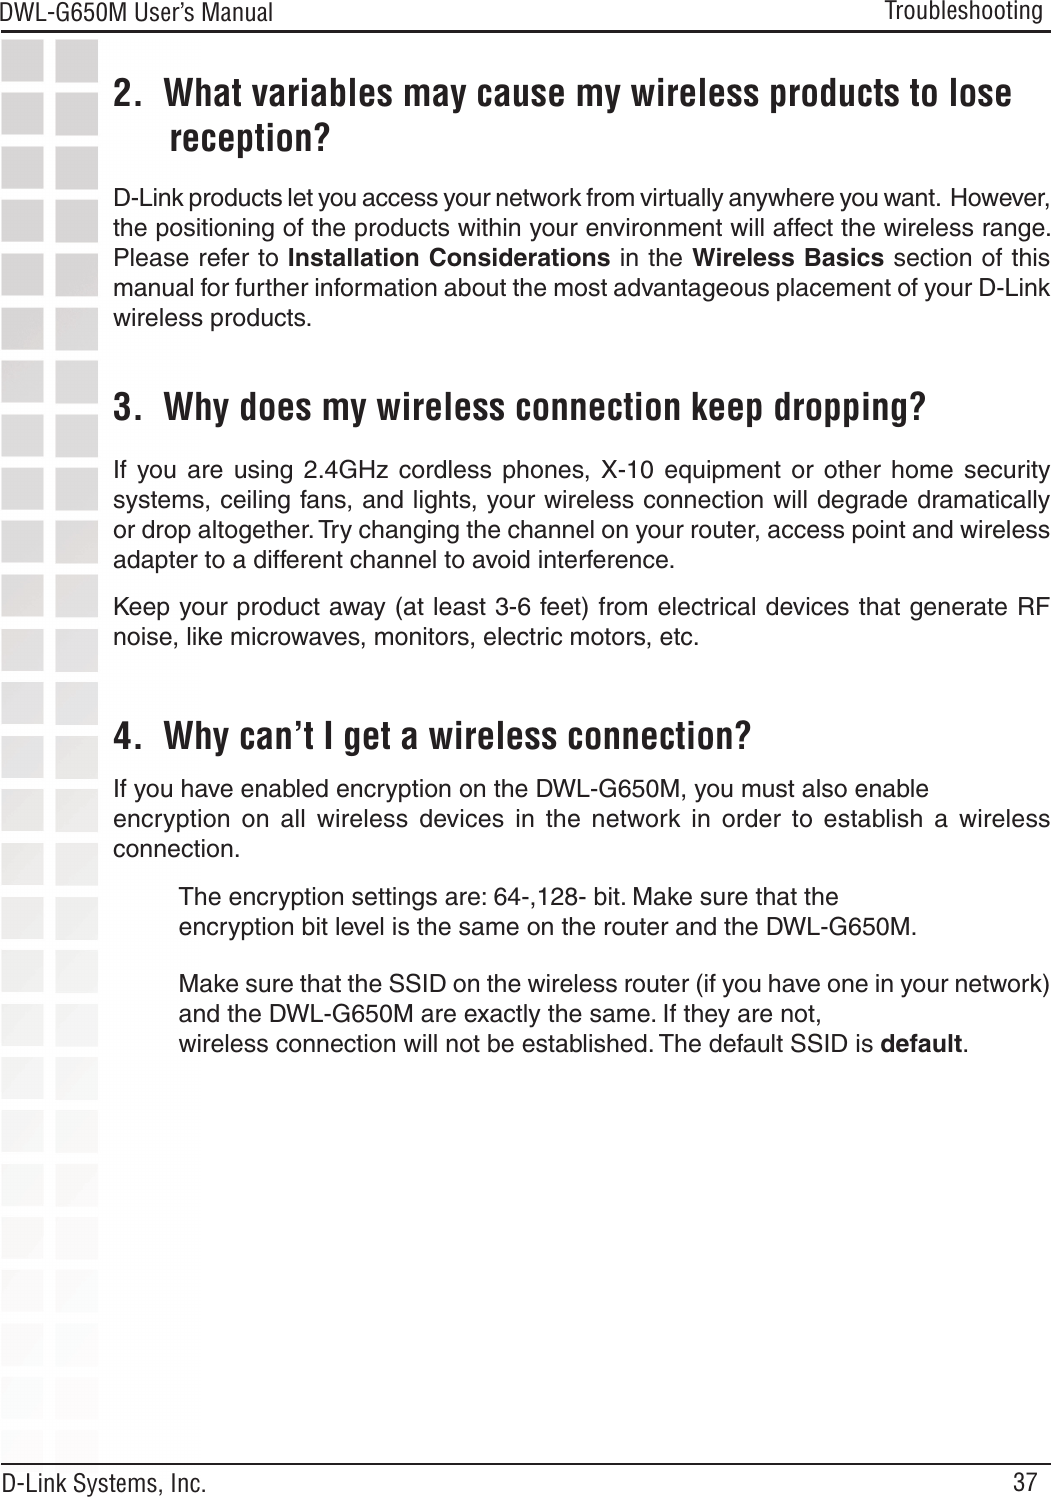 37DWL-G650M User’s Manual D-Link Systems, Inc.Troubleshooting2.  What variables may cause my wireless products to lose        reception?D-Link products let you access your network from virtually anywhere you want.  However, the positioning of the products within your environment will affect the wireless range. Please refer to Installation Considerations in the Wireless Basics section of this manual for further information about the most advantageous placement of your D-Link wireless products.3.  Why does my wireless connection keep dropping?4.  Why can’t I get a wireless connection?If you have enabled encryption on the DWL-G650M, you must also enable encryption  on  all  wireless  devices  in  the  network  in  order  to  establish  a  wireless connection.If  you  are  using  2.4GHz  cordless  phones,  X-10  equipment  or  other  home  security systems, ceiling fans, and lights, your wireless connection will degrade dramatically or drop altogether. Try changing the channel on your router, access point and wireless adapter to a different channel to avoid interference.Keep your product away (at least 3-6 feet) from electrical devices that generate RF noise, like microwaves, monitors, electric motors, etc.The encryption settings are: 64-,128- bit. Make sure that the encryption bit level is the same on the router and the DWL-G650M.Make sure that the SSID on the wireless router (if you have one in your network) and the DWL-G650M are exactly the same. If they are not, wireless connection will not be established. The default SSID is default.